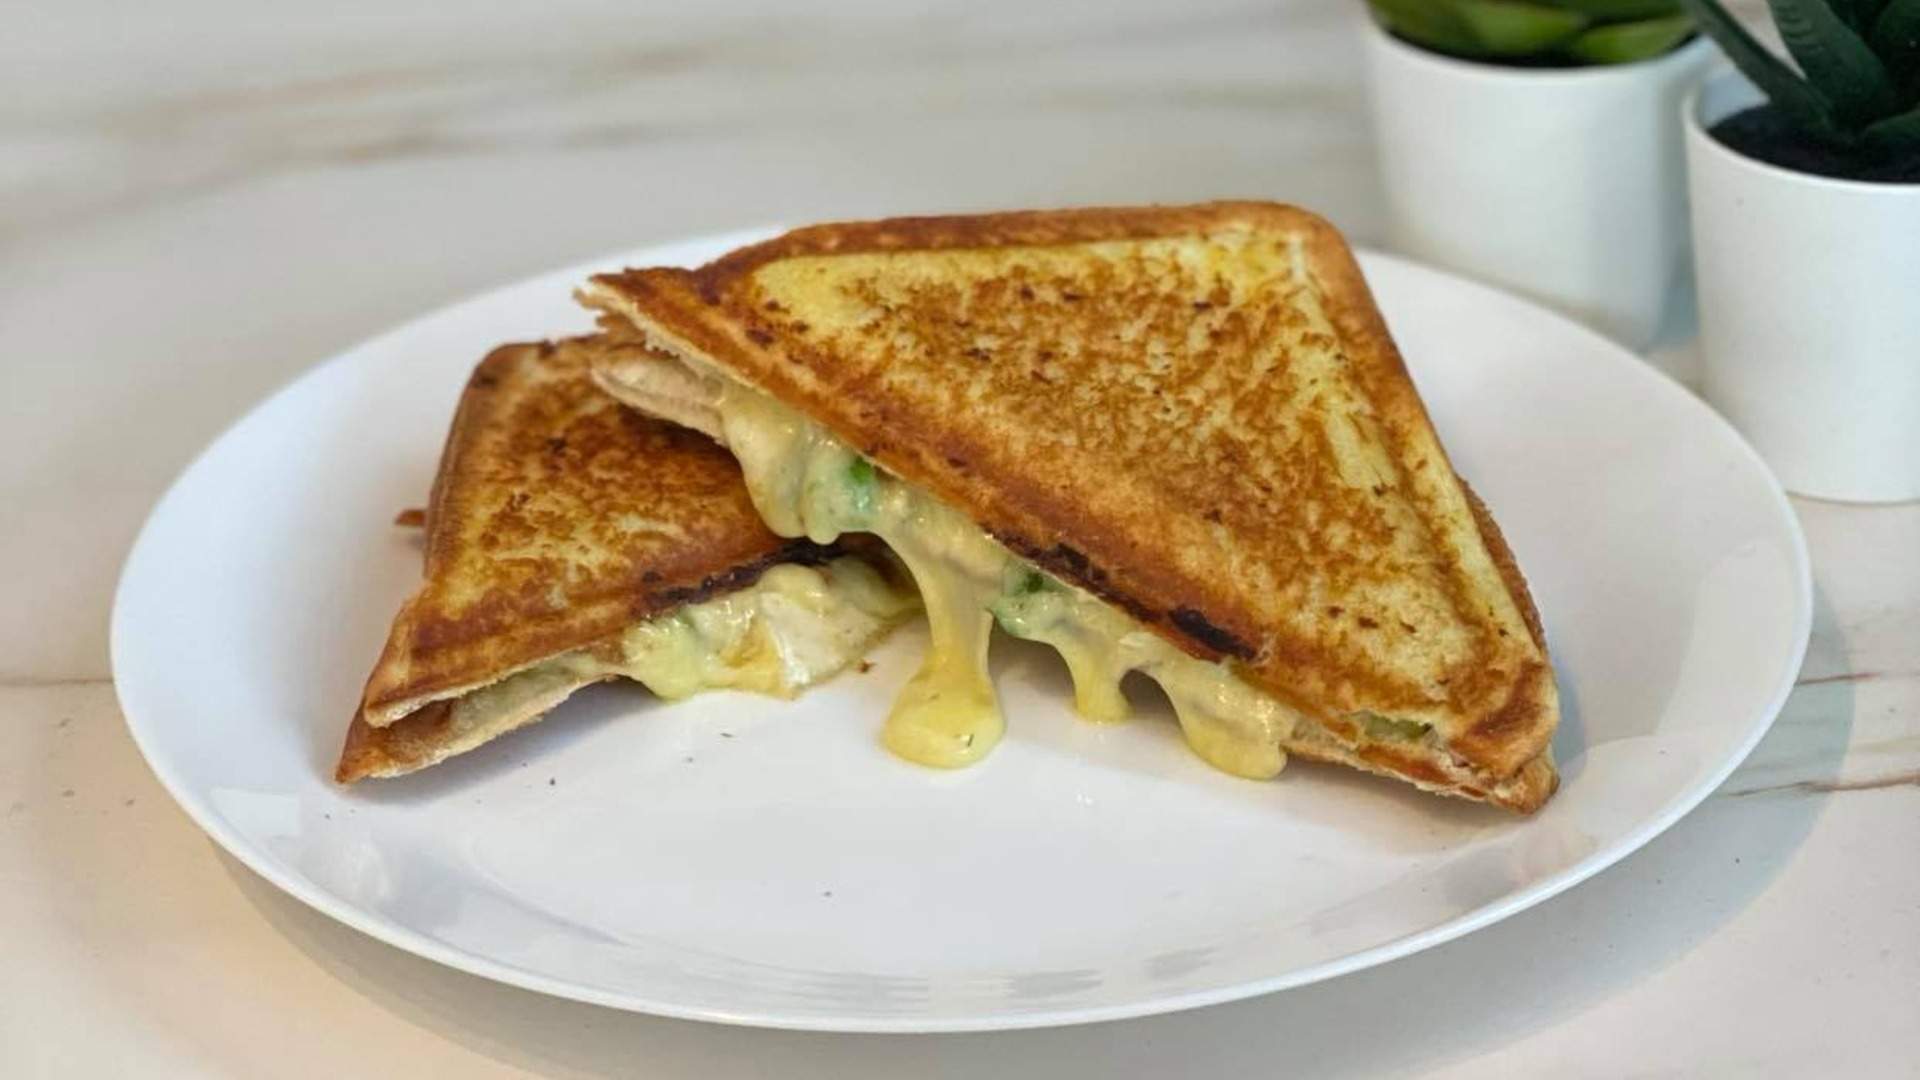 New South Sydney Cafe Miss Jaffles Is Serving Up Mac and Cheese, Shepherd's Pie and Biscoff Toasties